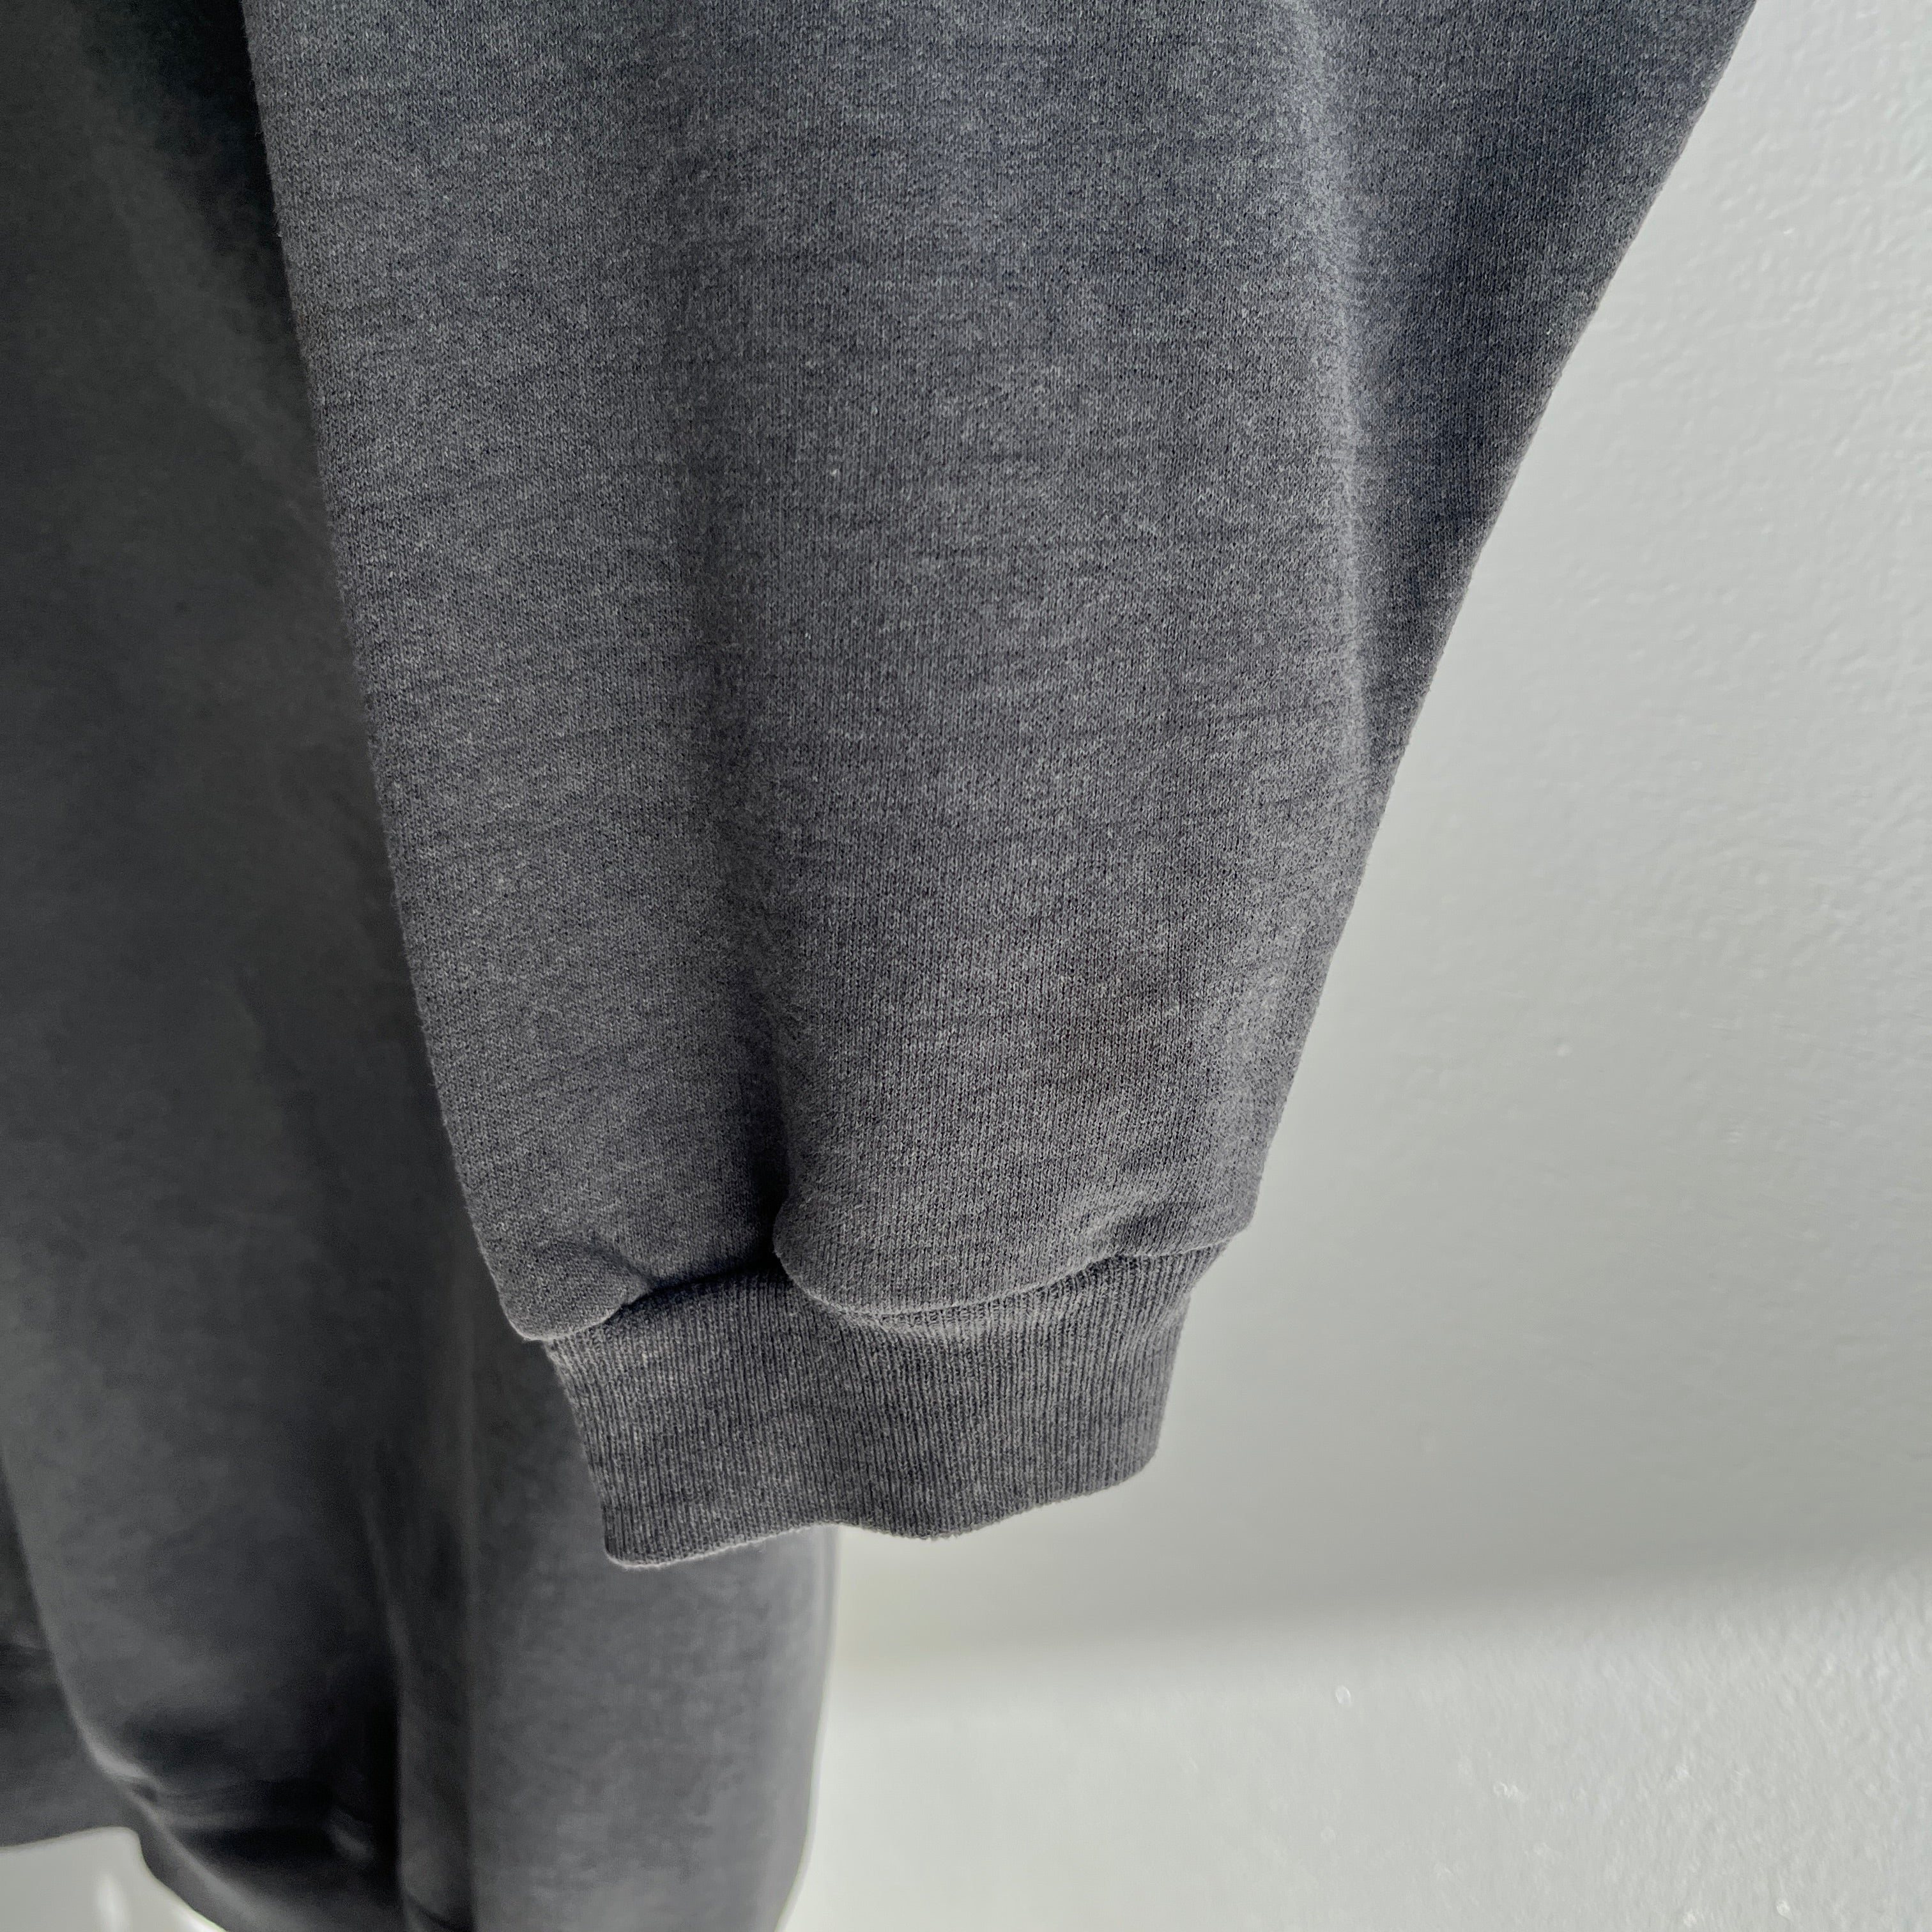 1990s Faded Black to Gray/Deep Gray Low Pit Relaxed Fit Sweatshirt